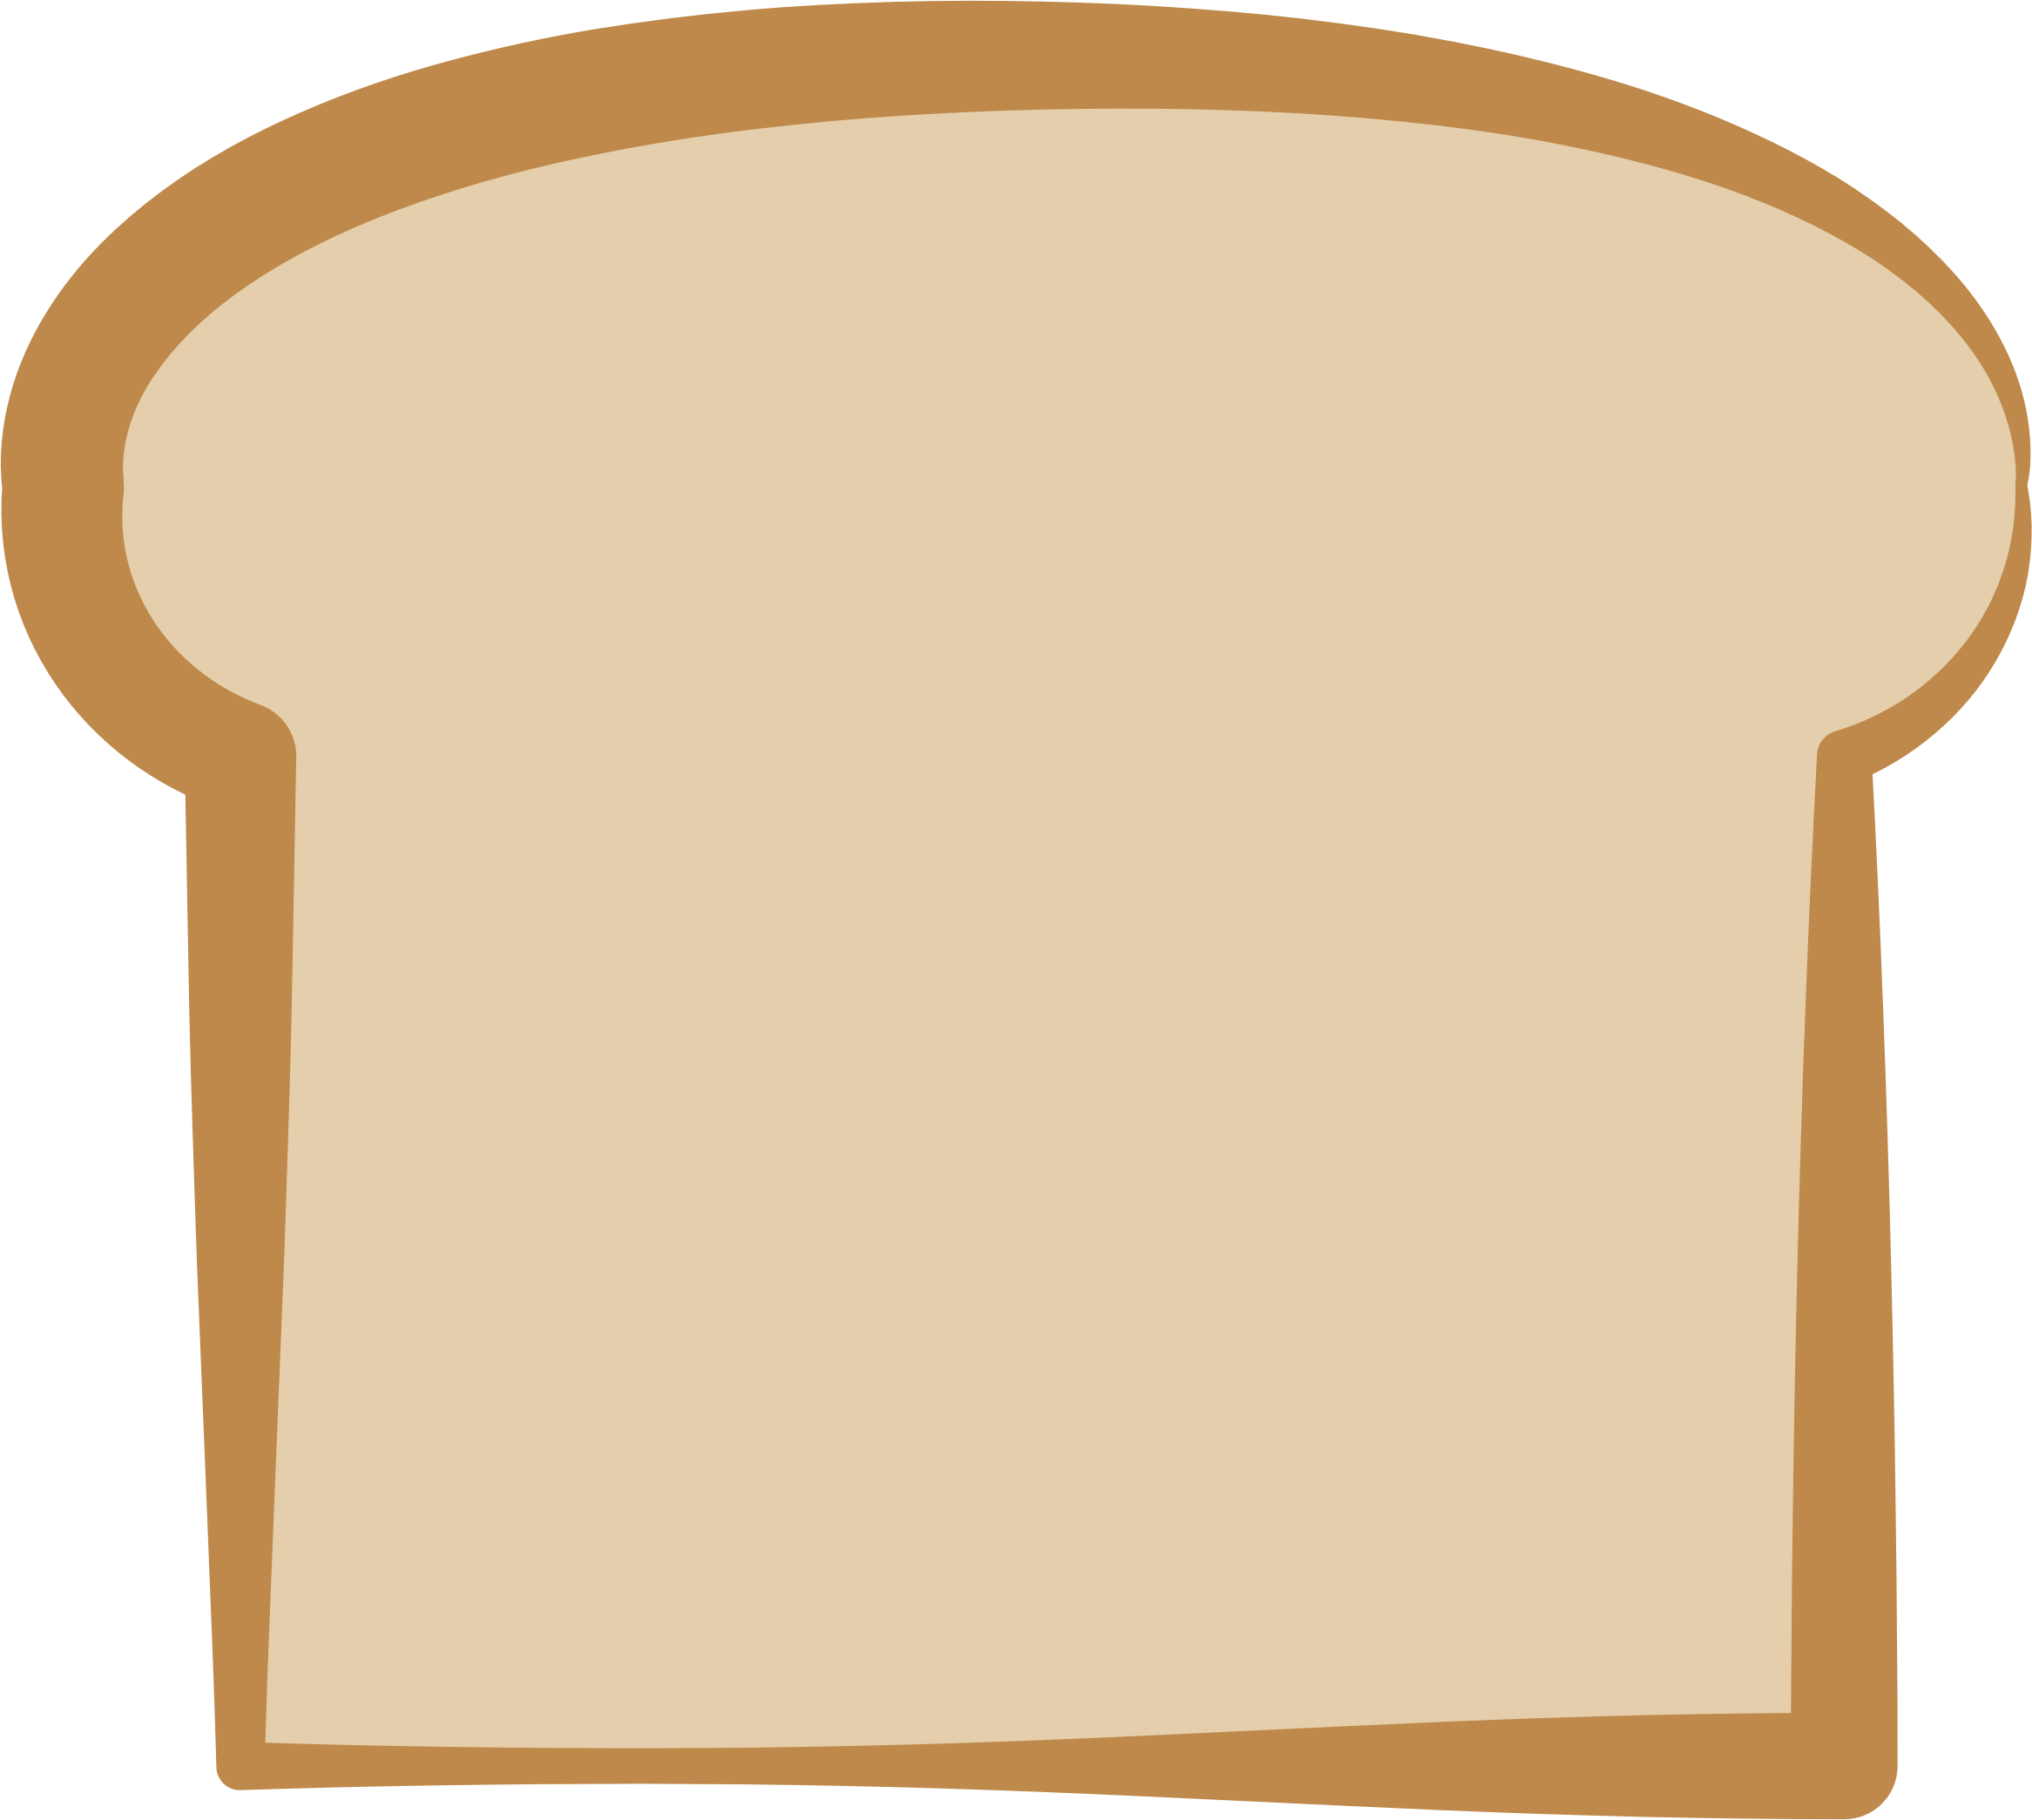 Square clipart toast, Square toast Transparent FREE for